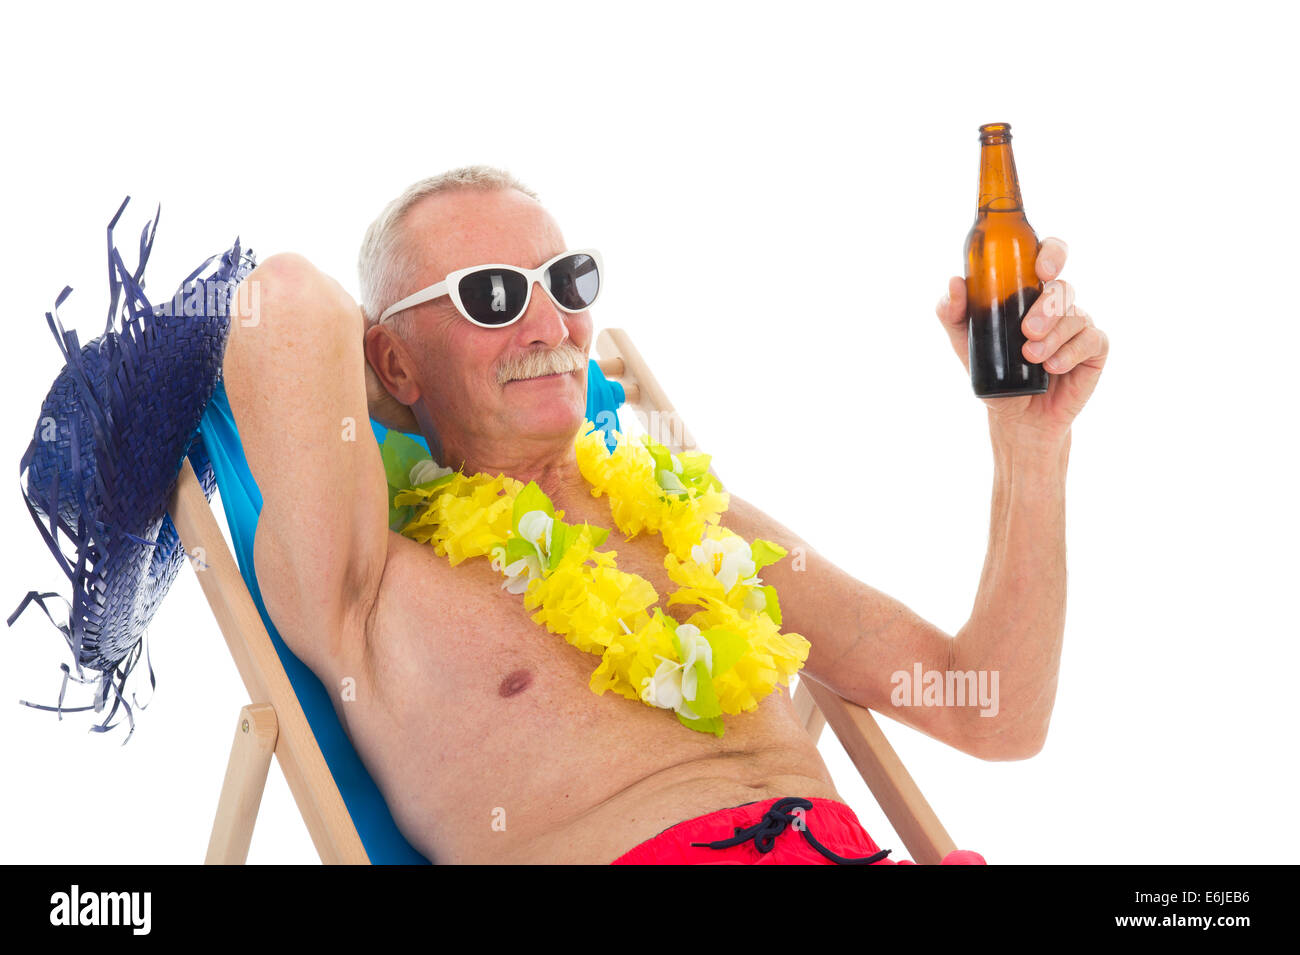 retired-man-on-vacation-sitting-in-beach-chair-drinking-beer-E6JEB6.jpg